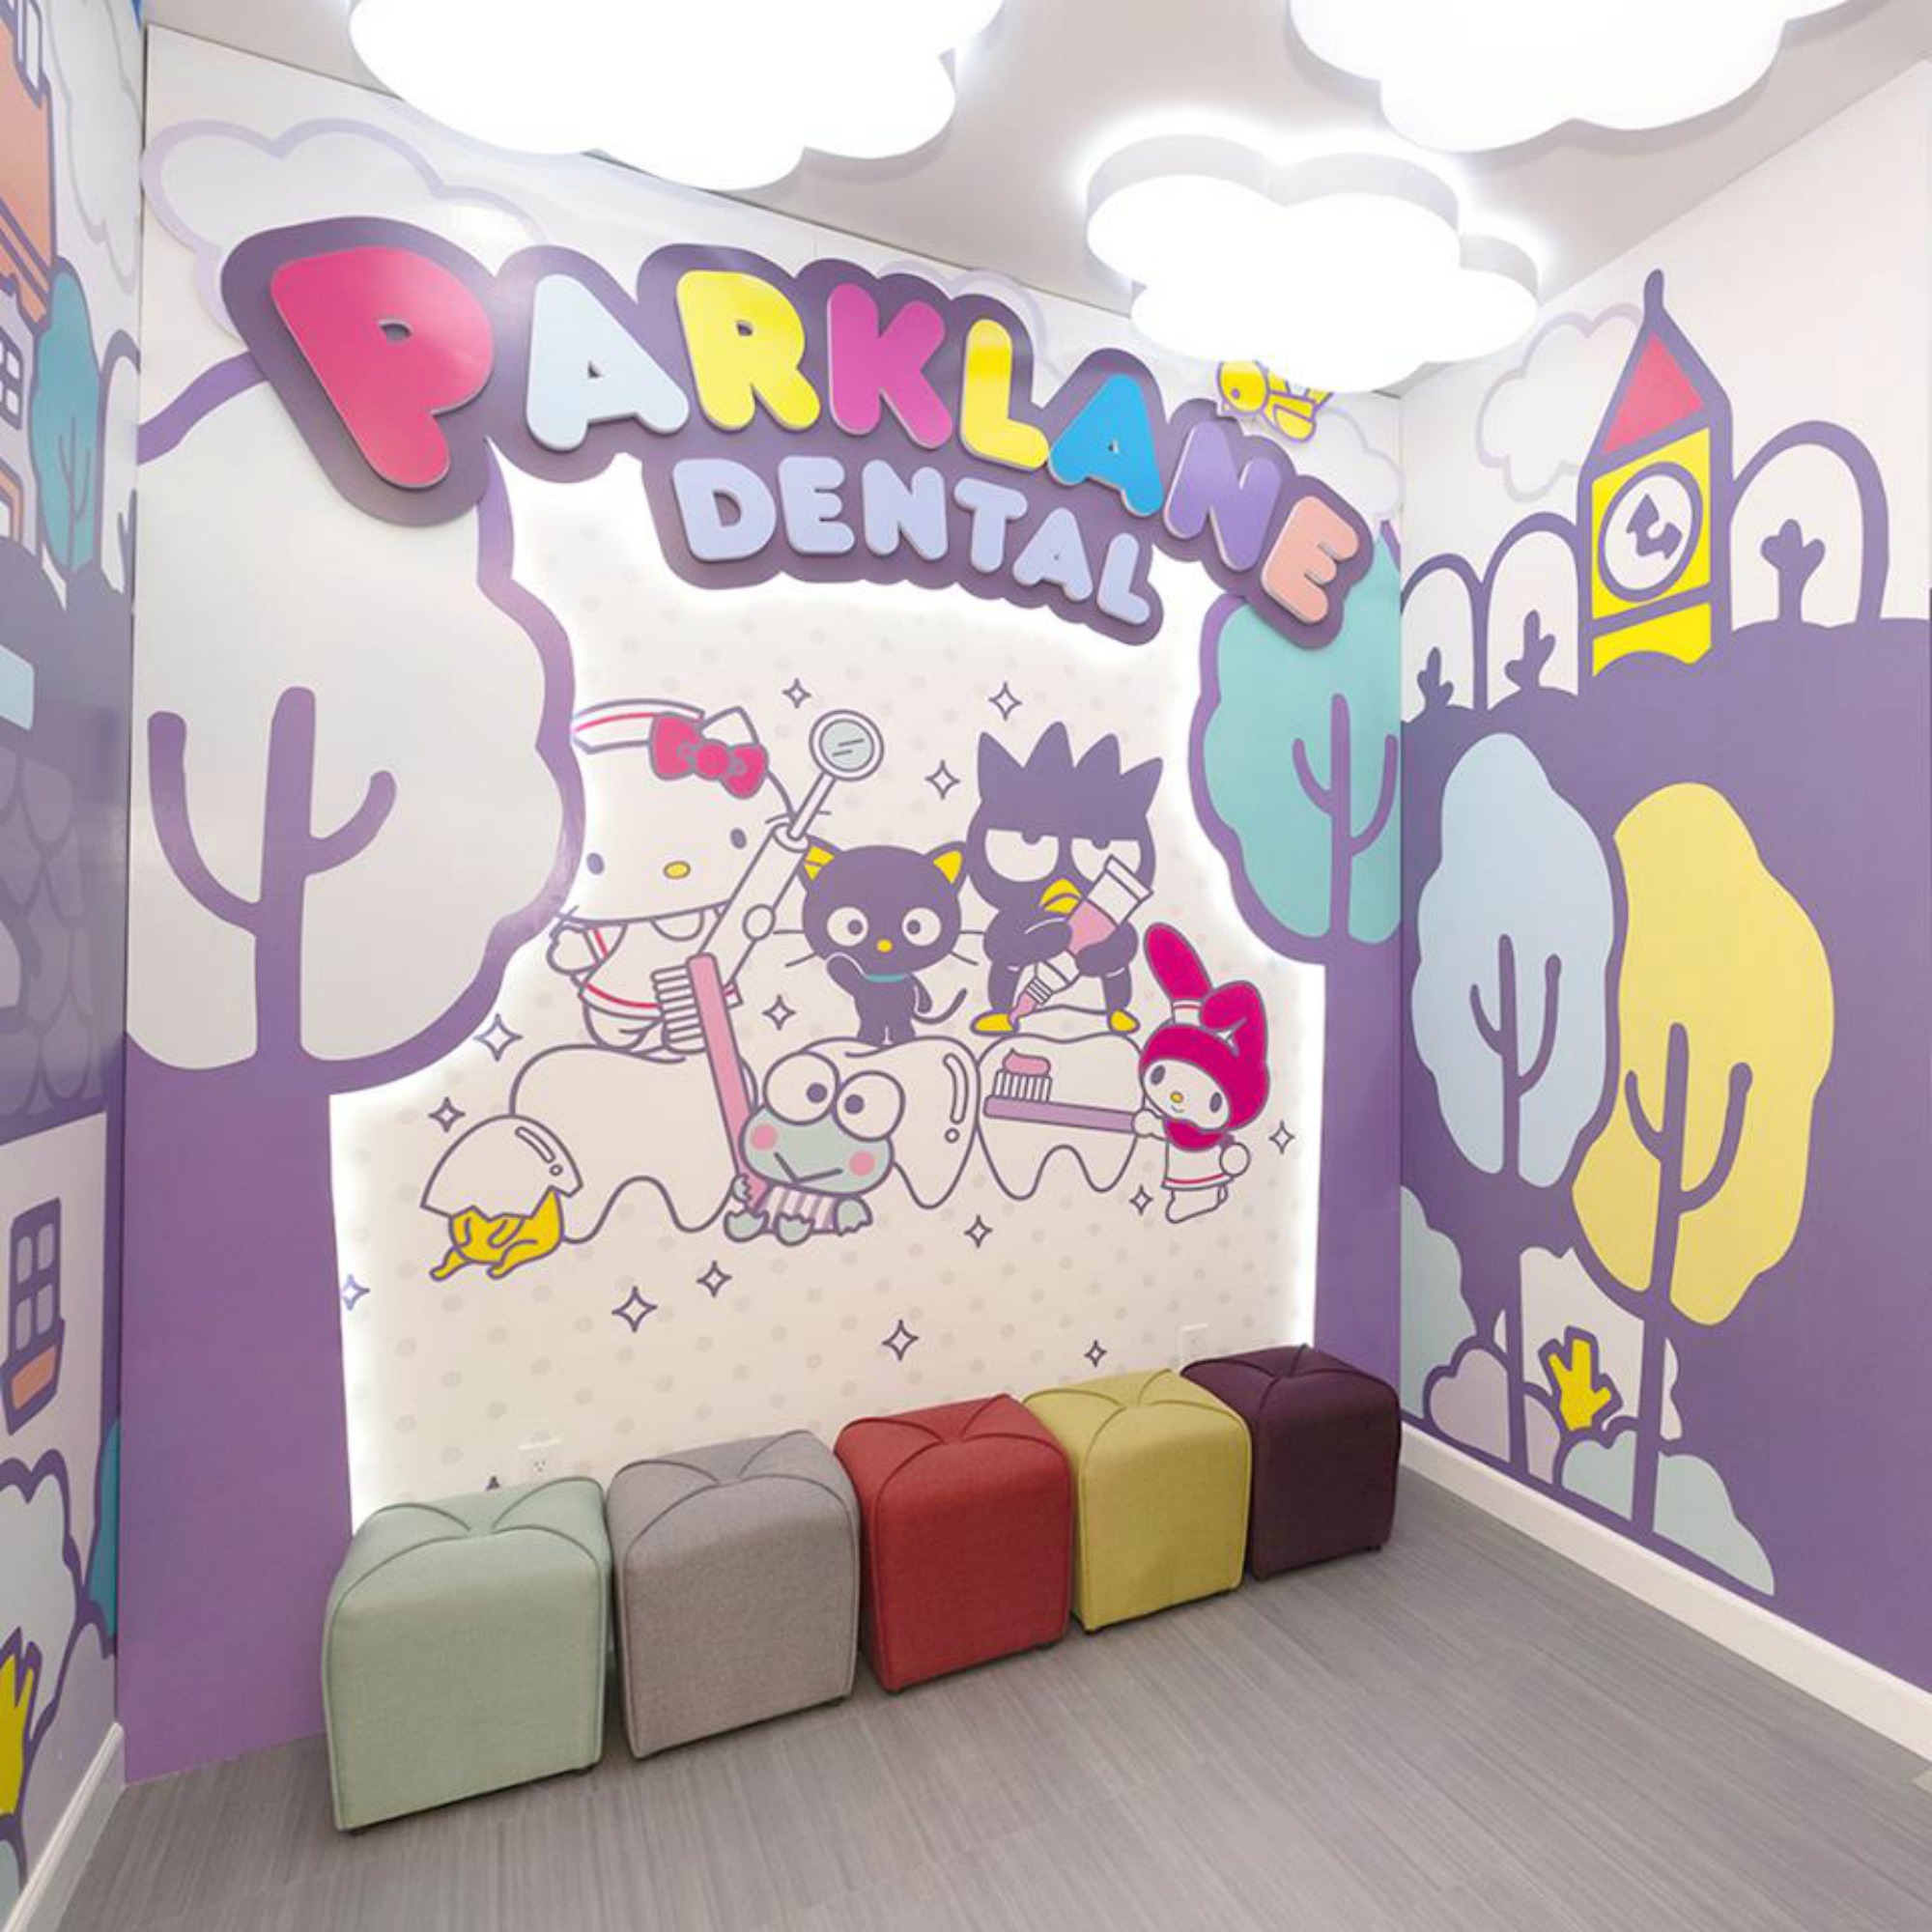 Now You Can Get Your Teeth Cleaned At A Hello Kitty-Themed Dentist Office